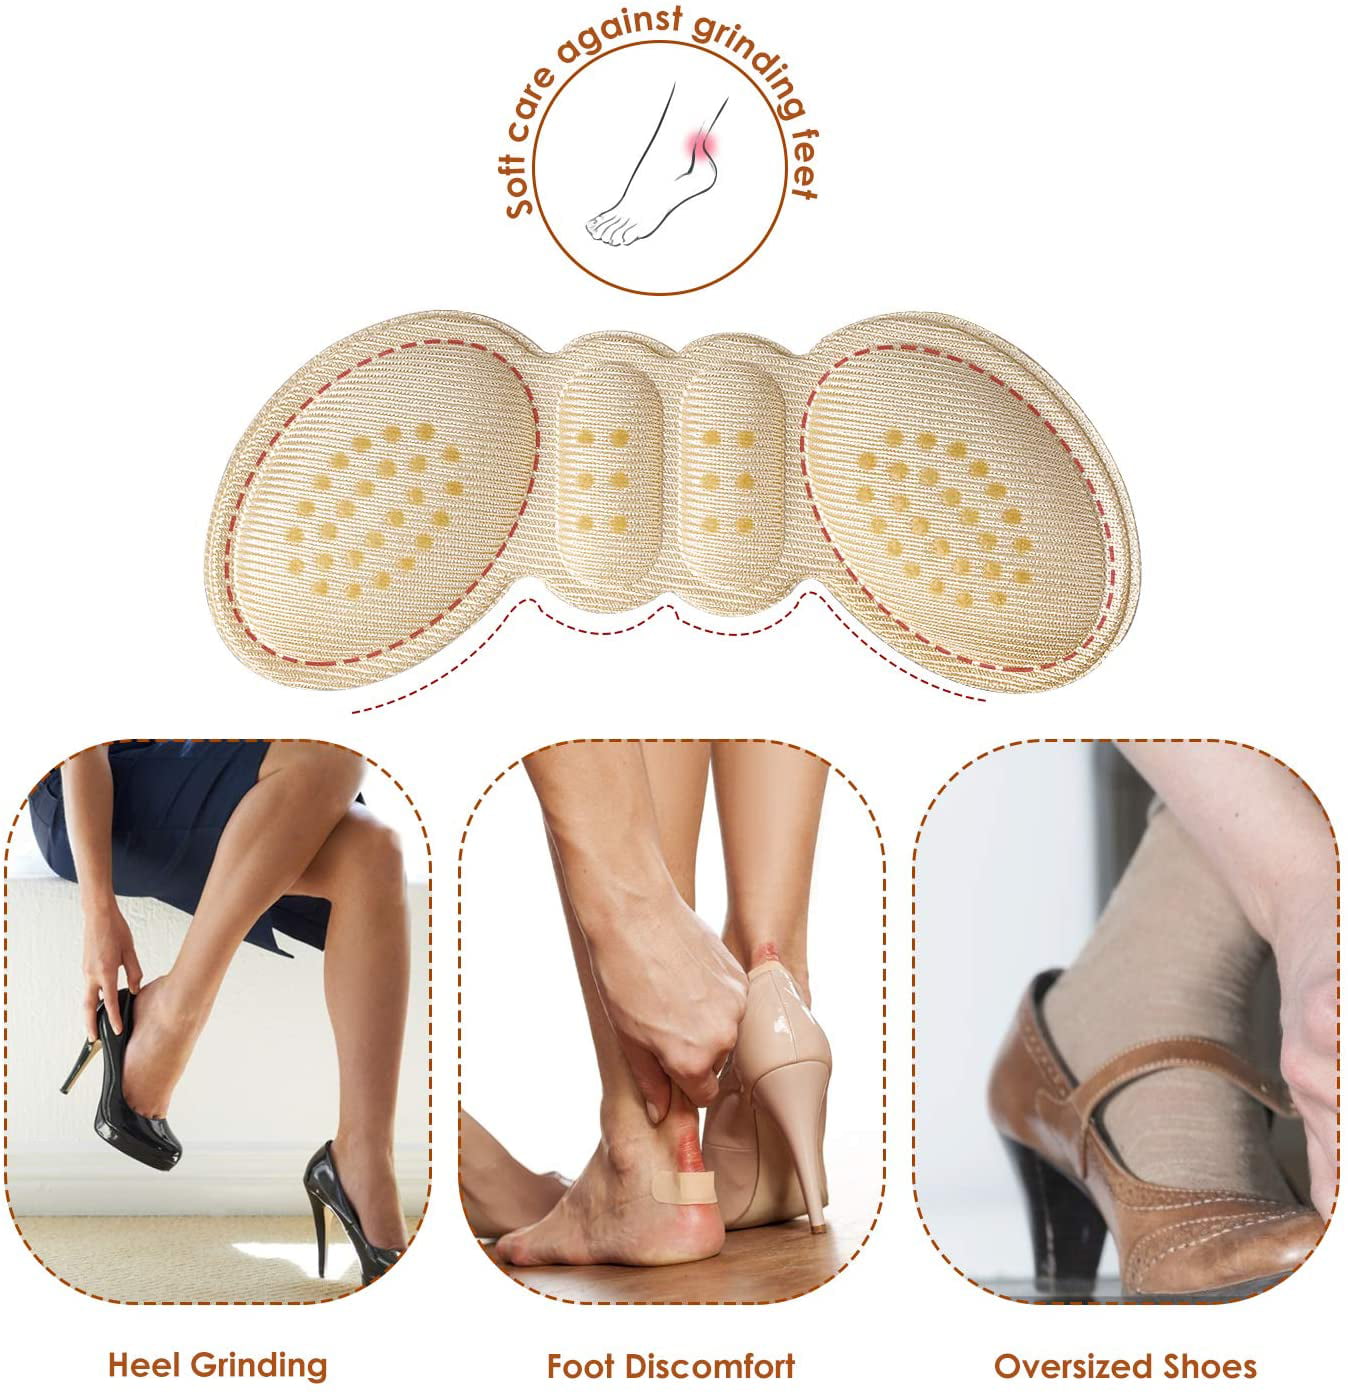 Heel Grip Liner Insert for Shoes Too Big,Shoe Filler Improved Shoe Fit and Comfort,Leather Prevent Blisters Beige, Thick 